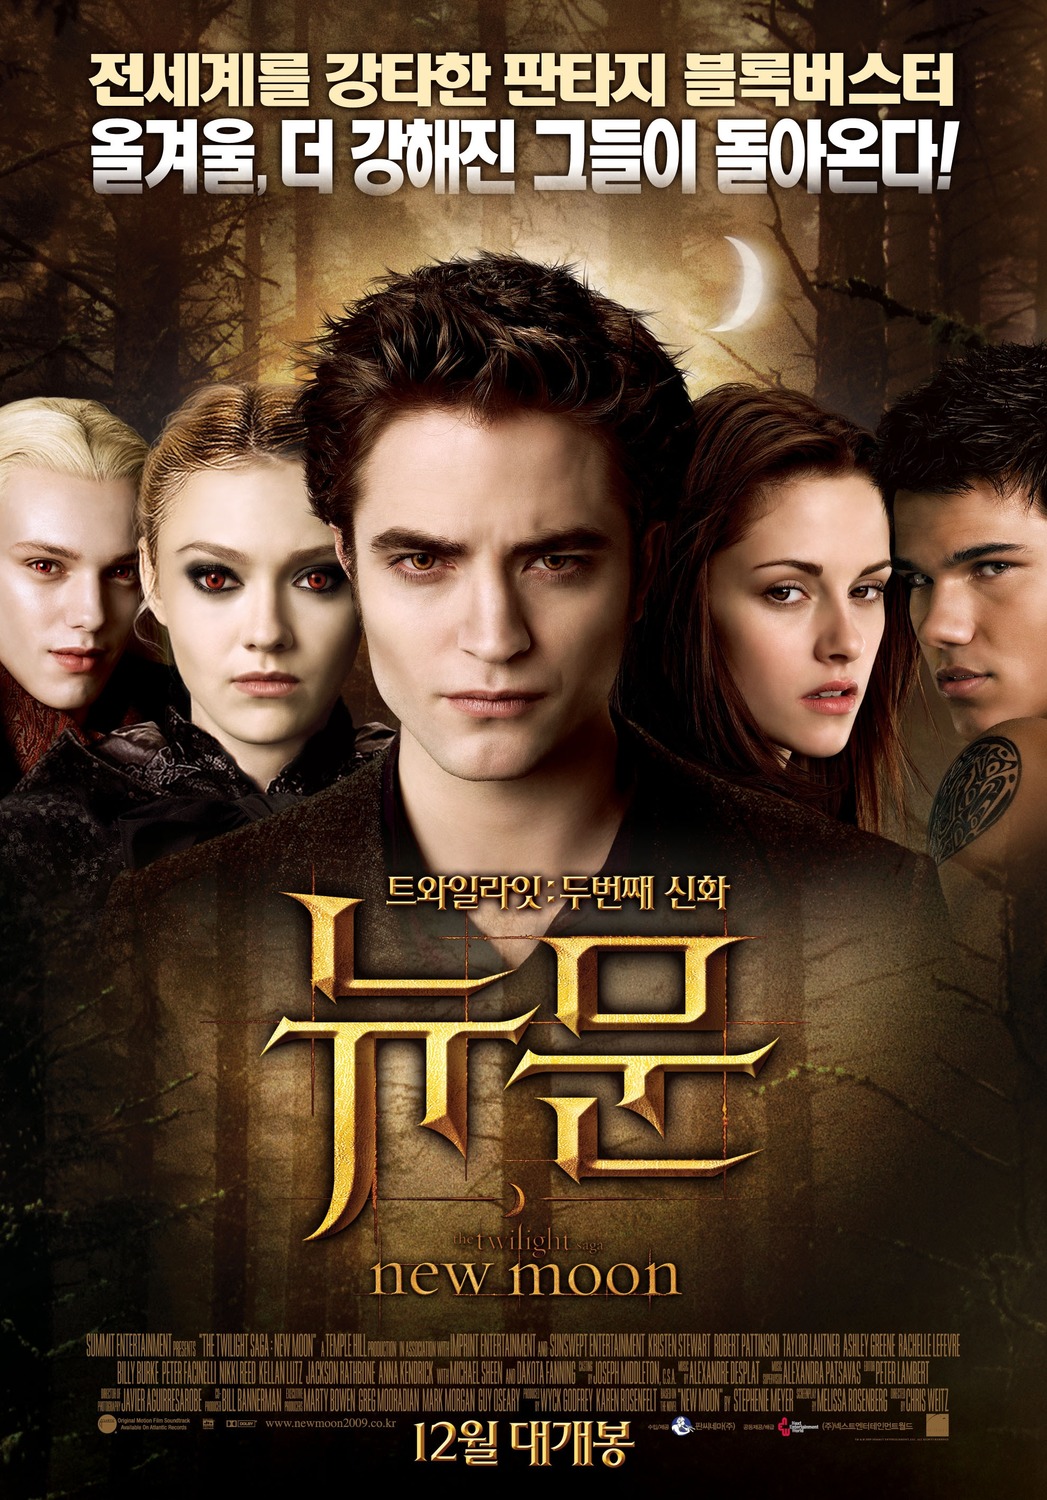 Extra Large Movie Poster Image for The Twilight Saga: New Moon (#5 of 13)